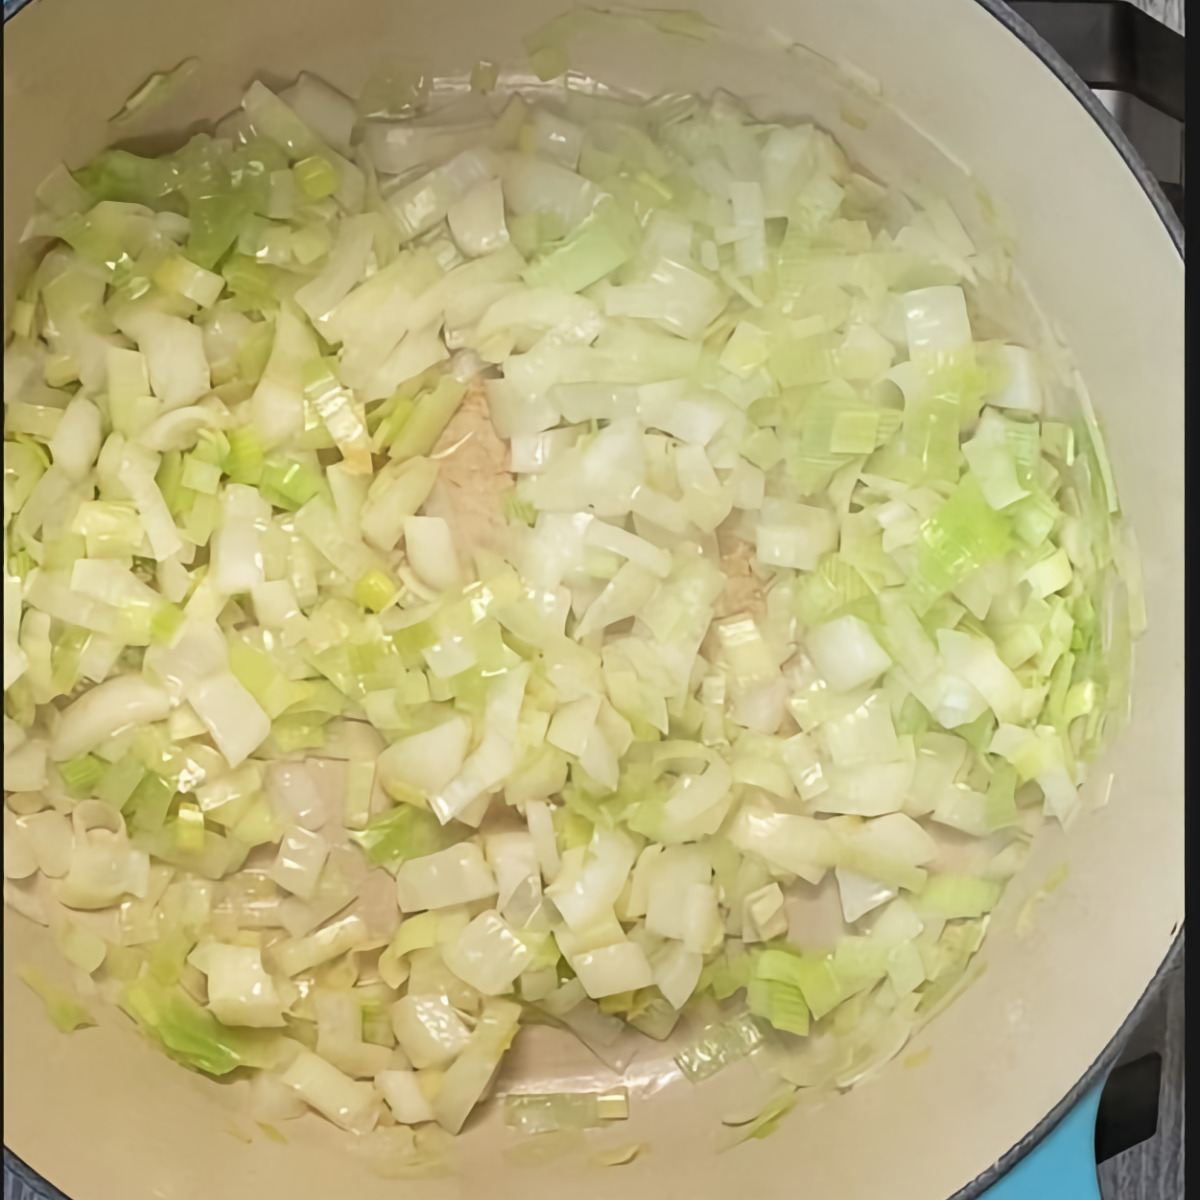 Top view of leeks and onions sautéing in butter. 